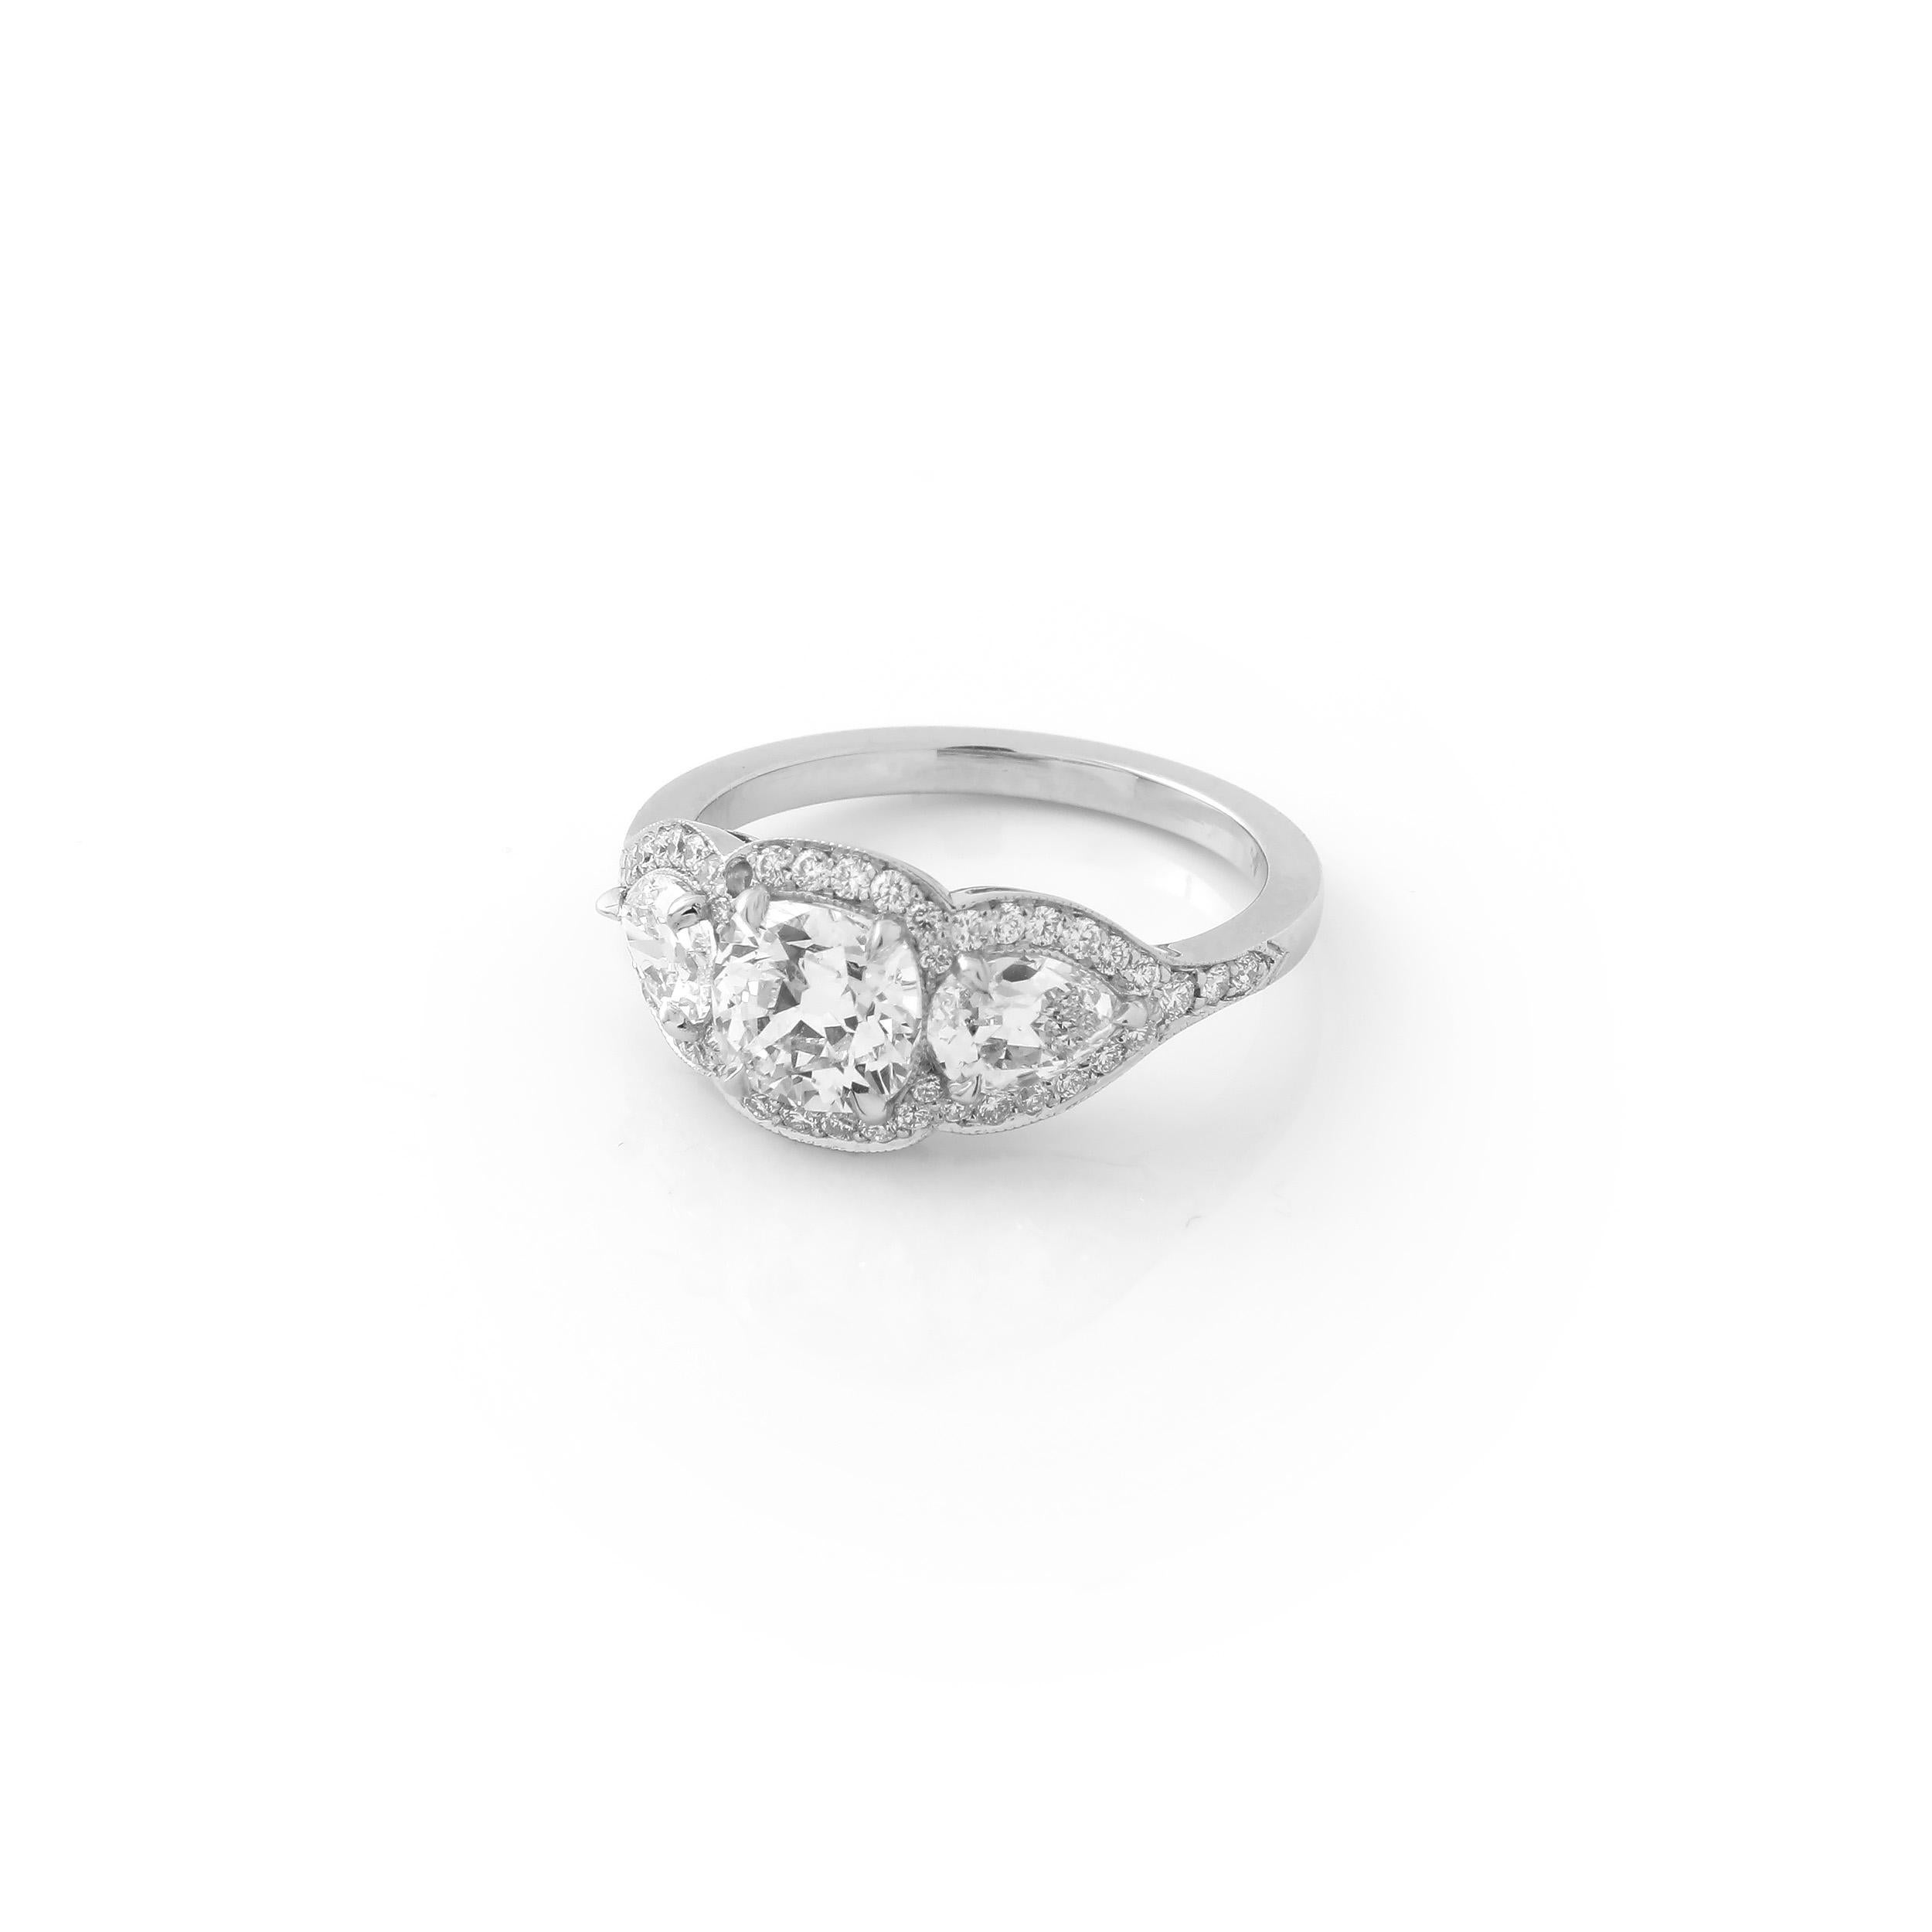 This three-stone ring features a GIA certified 1.01 carat F VS1 antique-cut cushion center and a pair of F/G VS antique-cut pear shape side stones, weighing 0.86 carats. The three diamonds are set in a beautiful pavé platinum mounting giving the